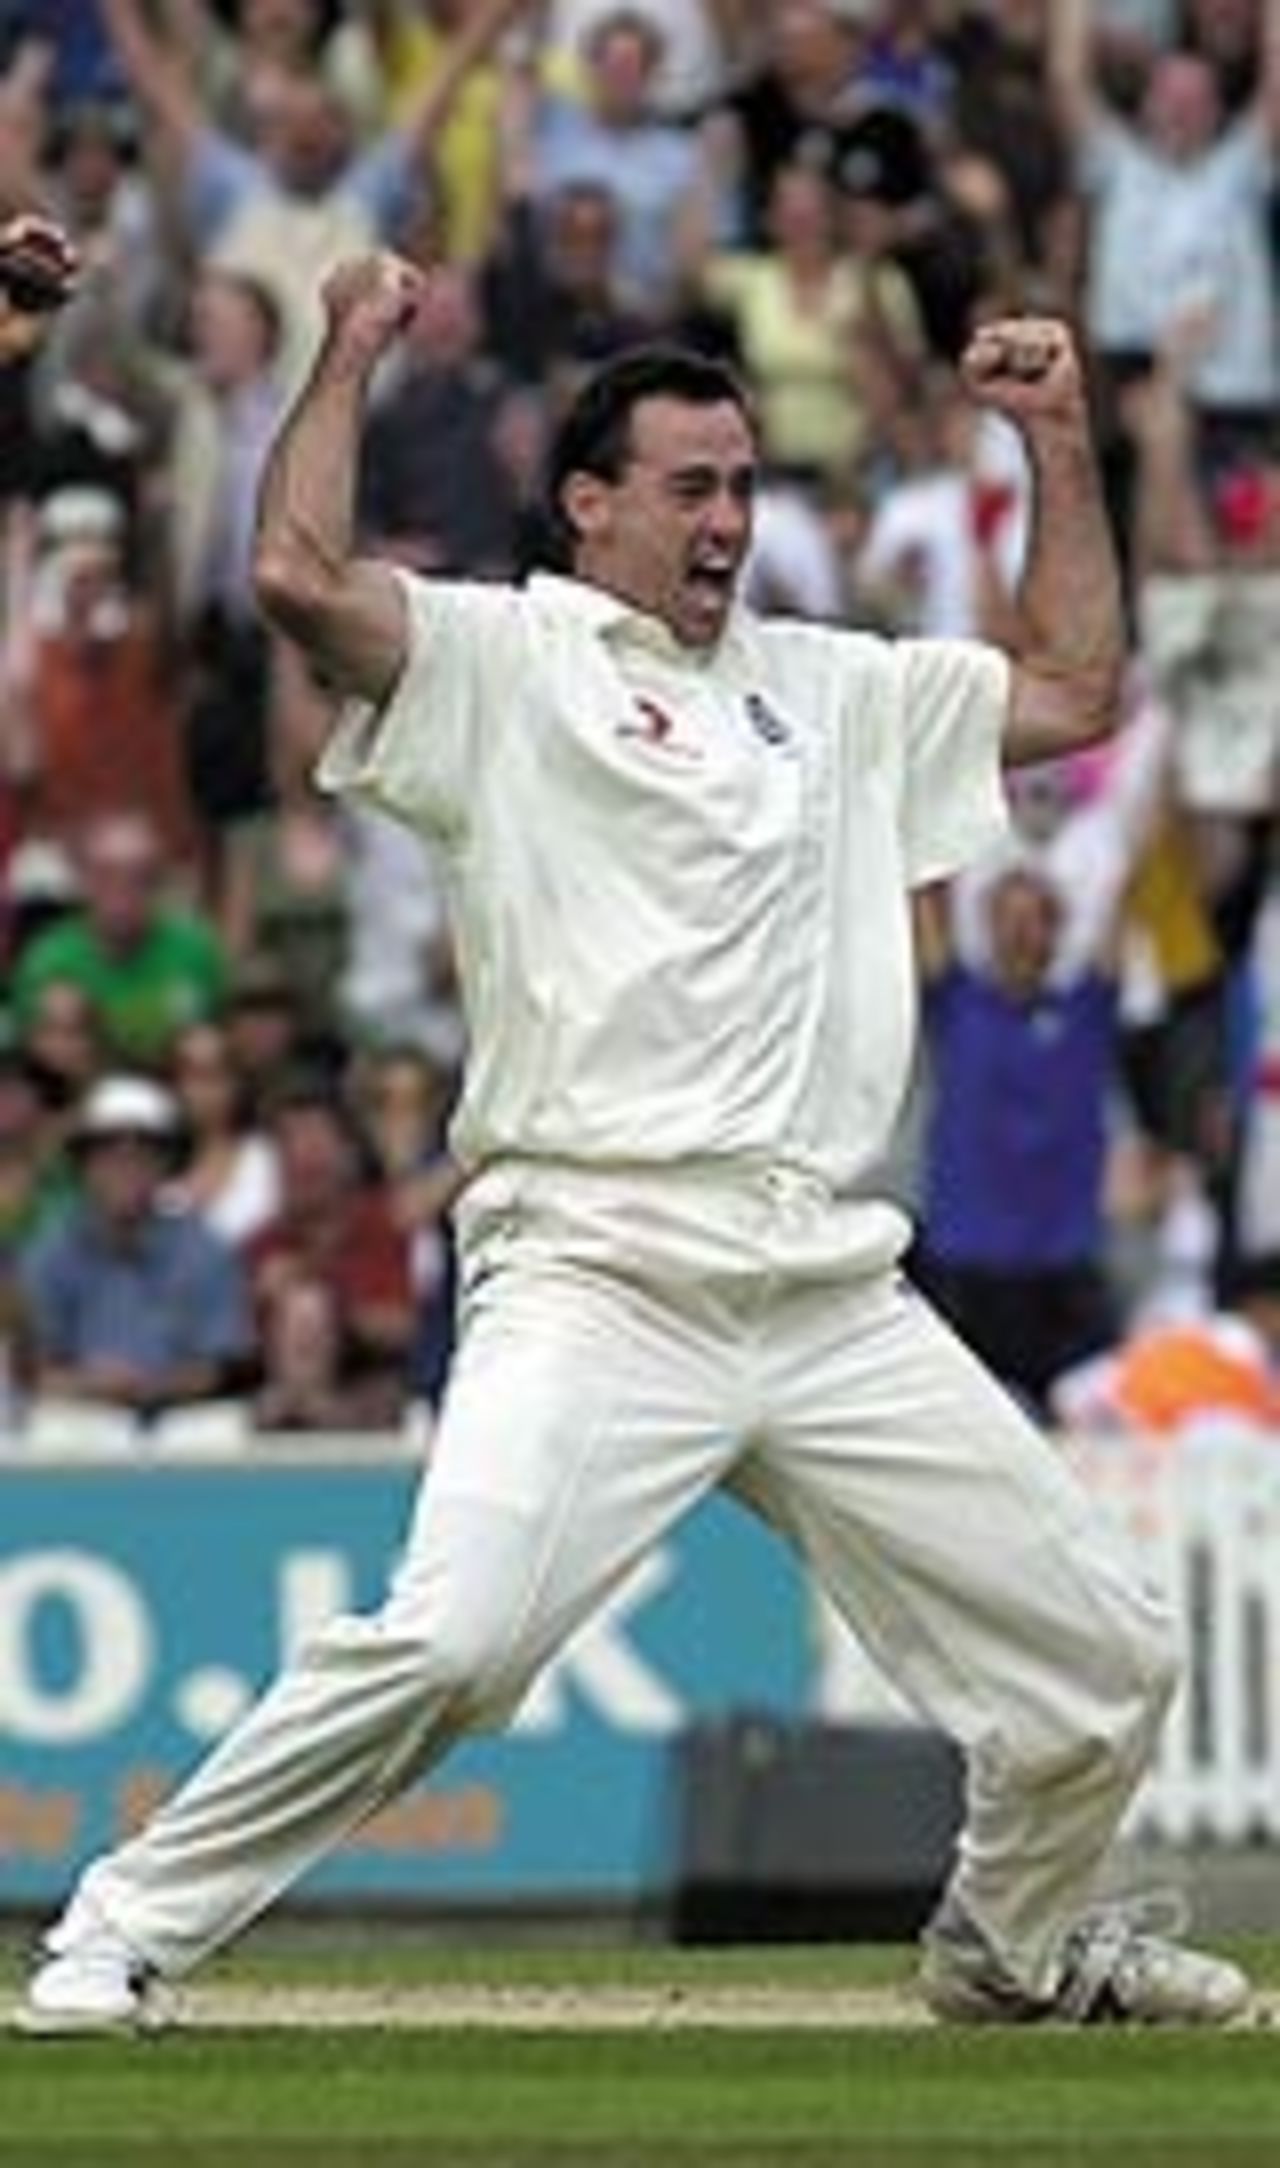 Martin Bicknell celebrates getting Graeme Smith lbw, England v South Africa, 5th Test, The Oval, September 7, 2003